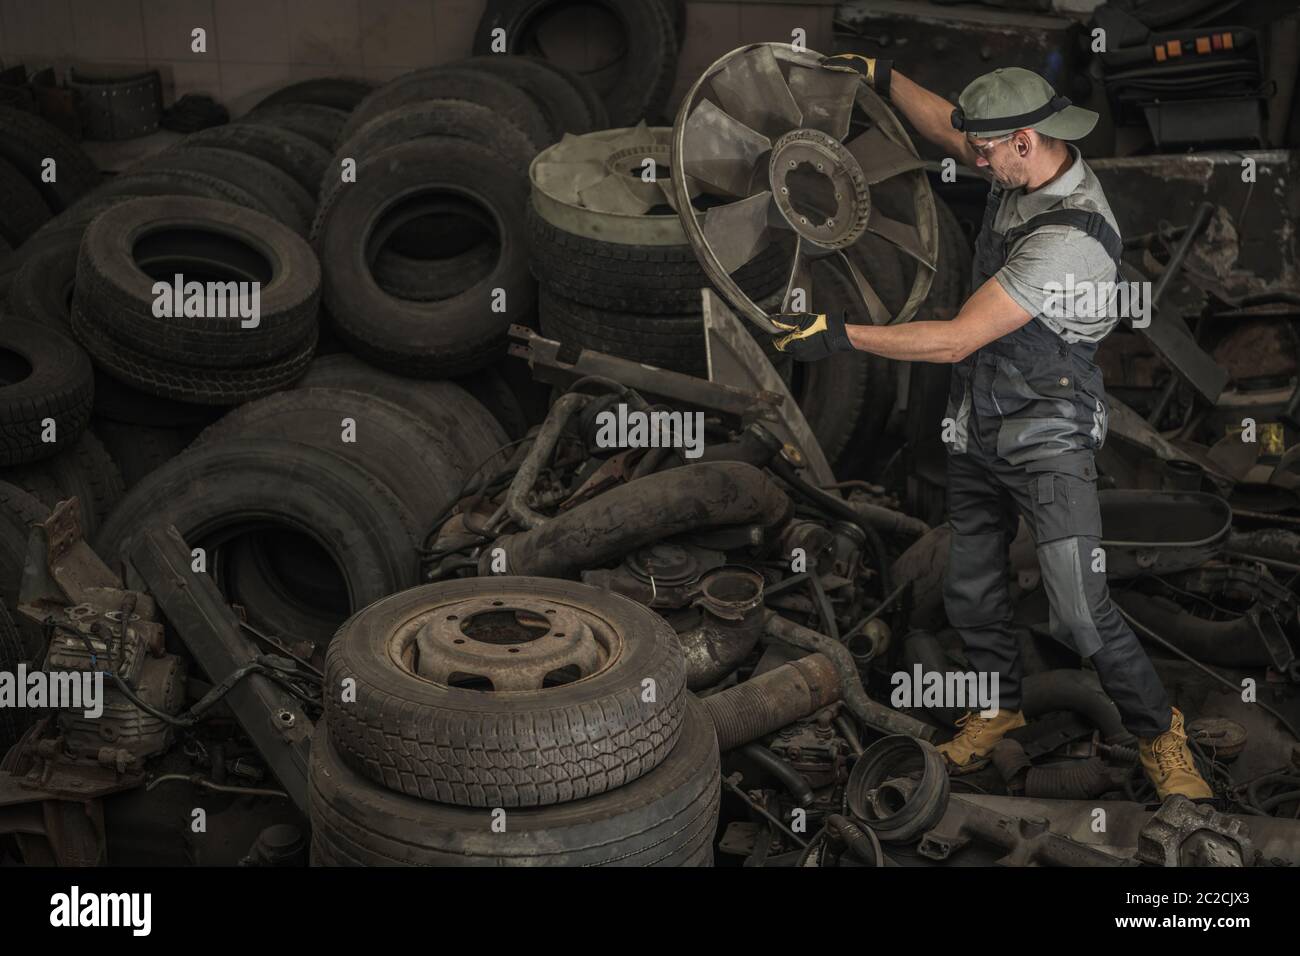 Caucasian Truck Mechanic Looking For Used Parts in Large Pile. Reusing Mechanical Elements. Bush Fix Truck and Bus Service. Stock Photo